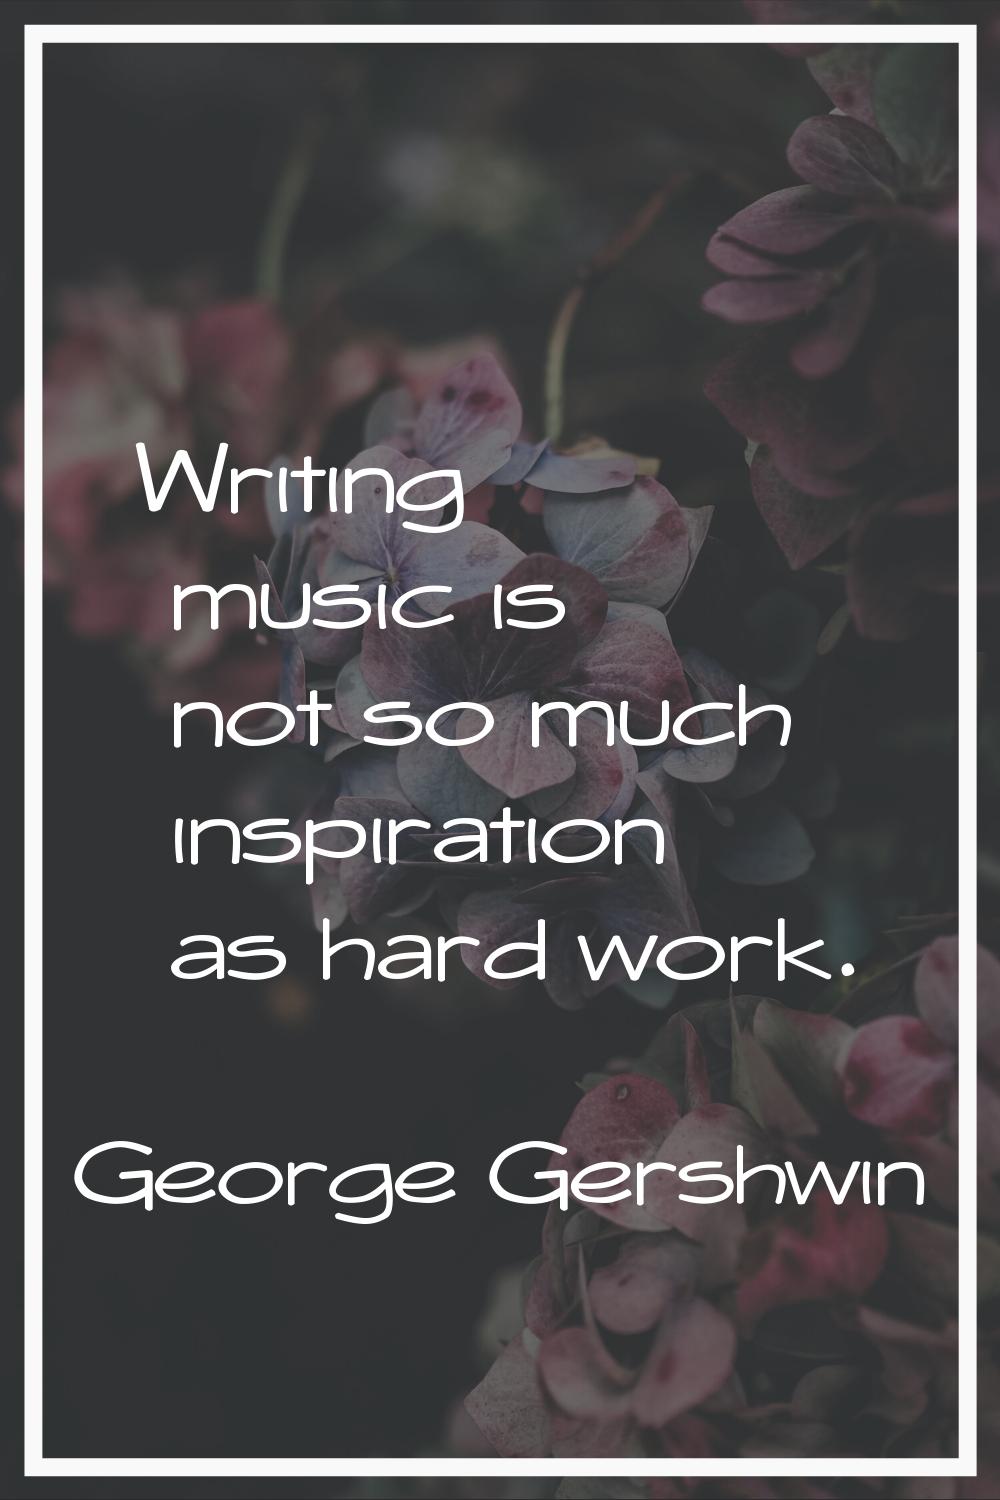 Writing music is not so much inspiration as hard work.